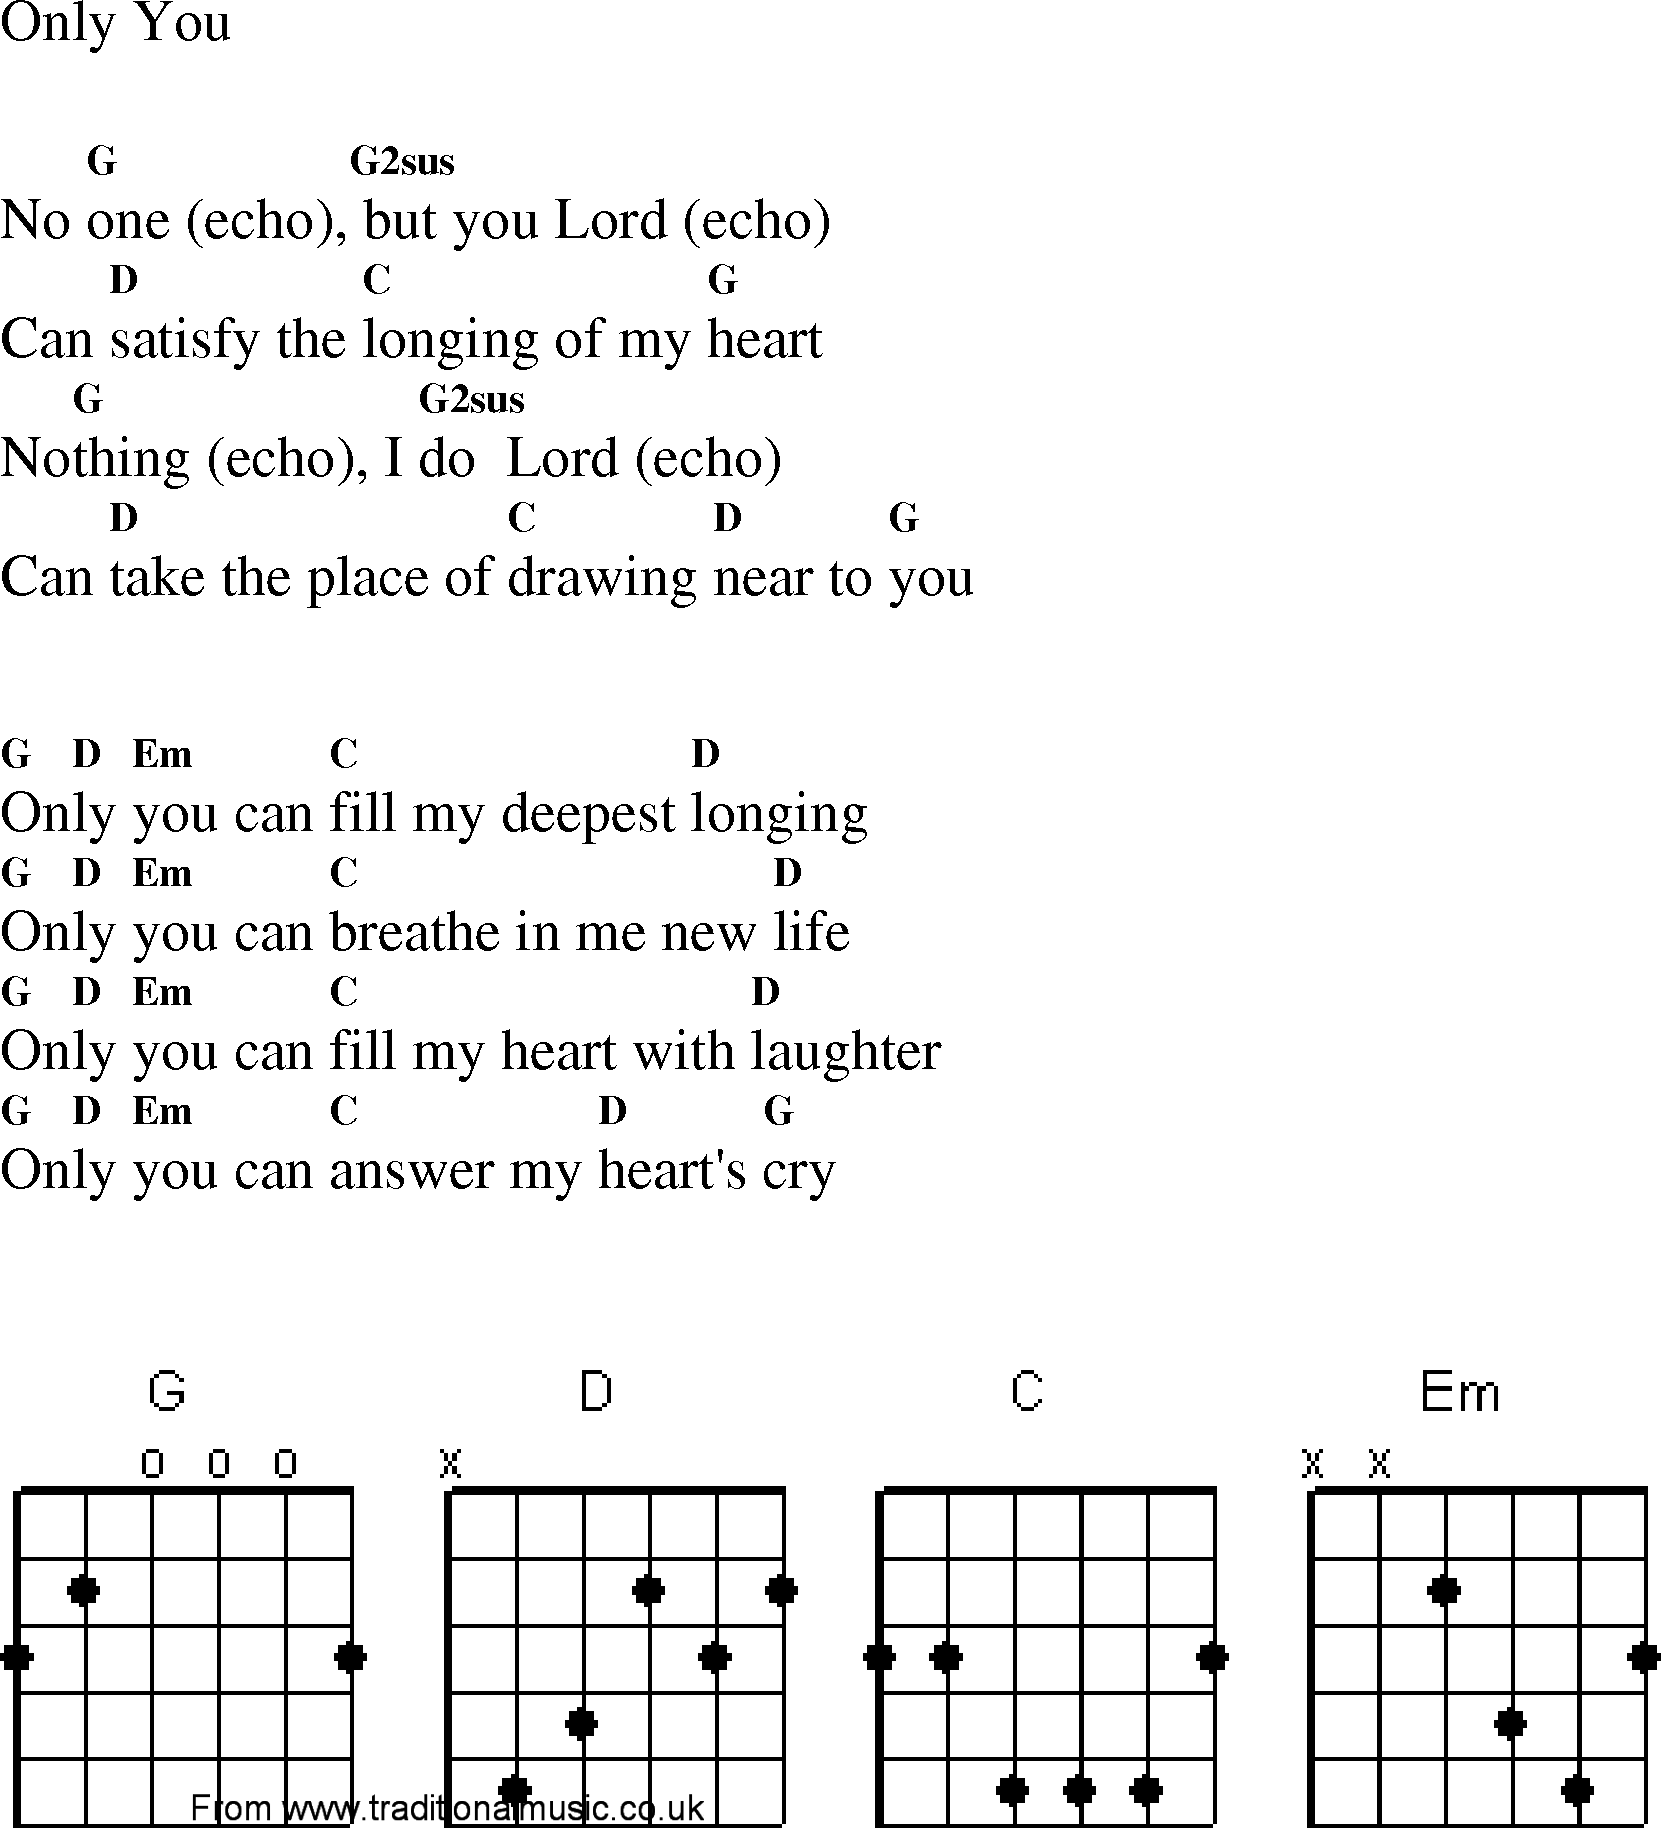 Gospel Song: only_you2, lyrics and chords.